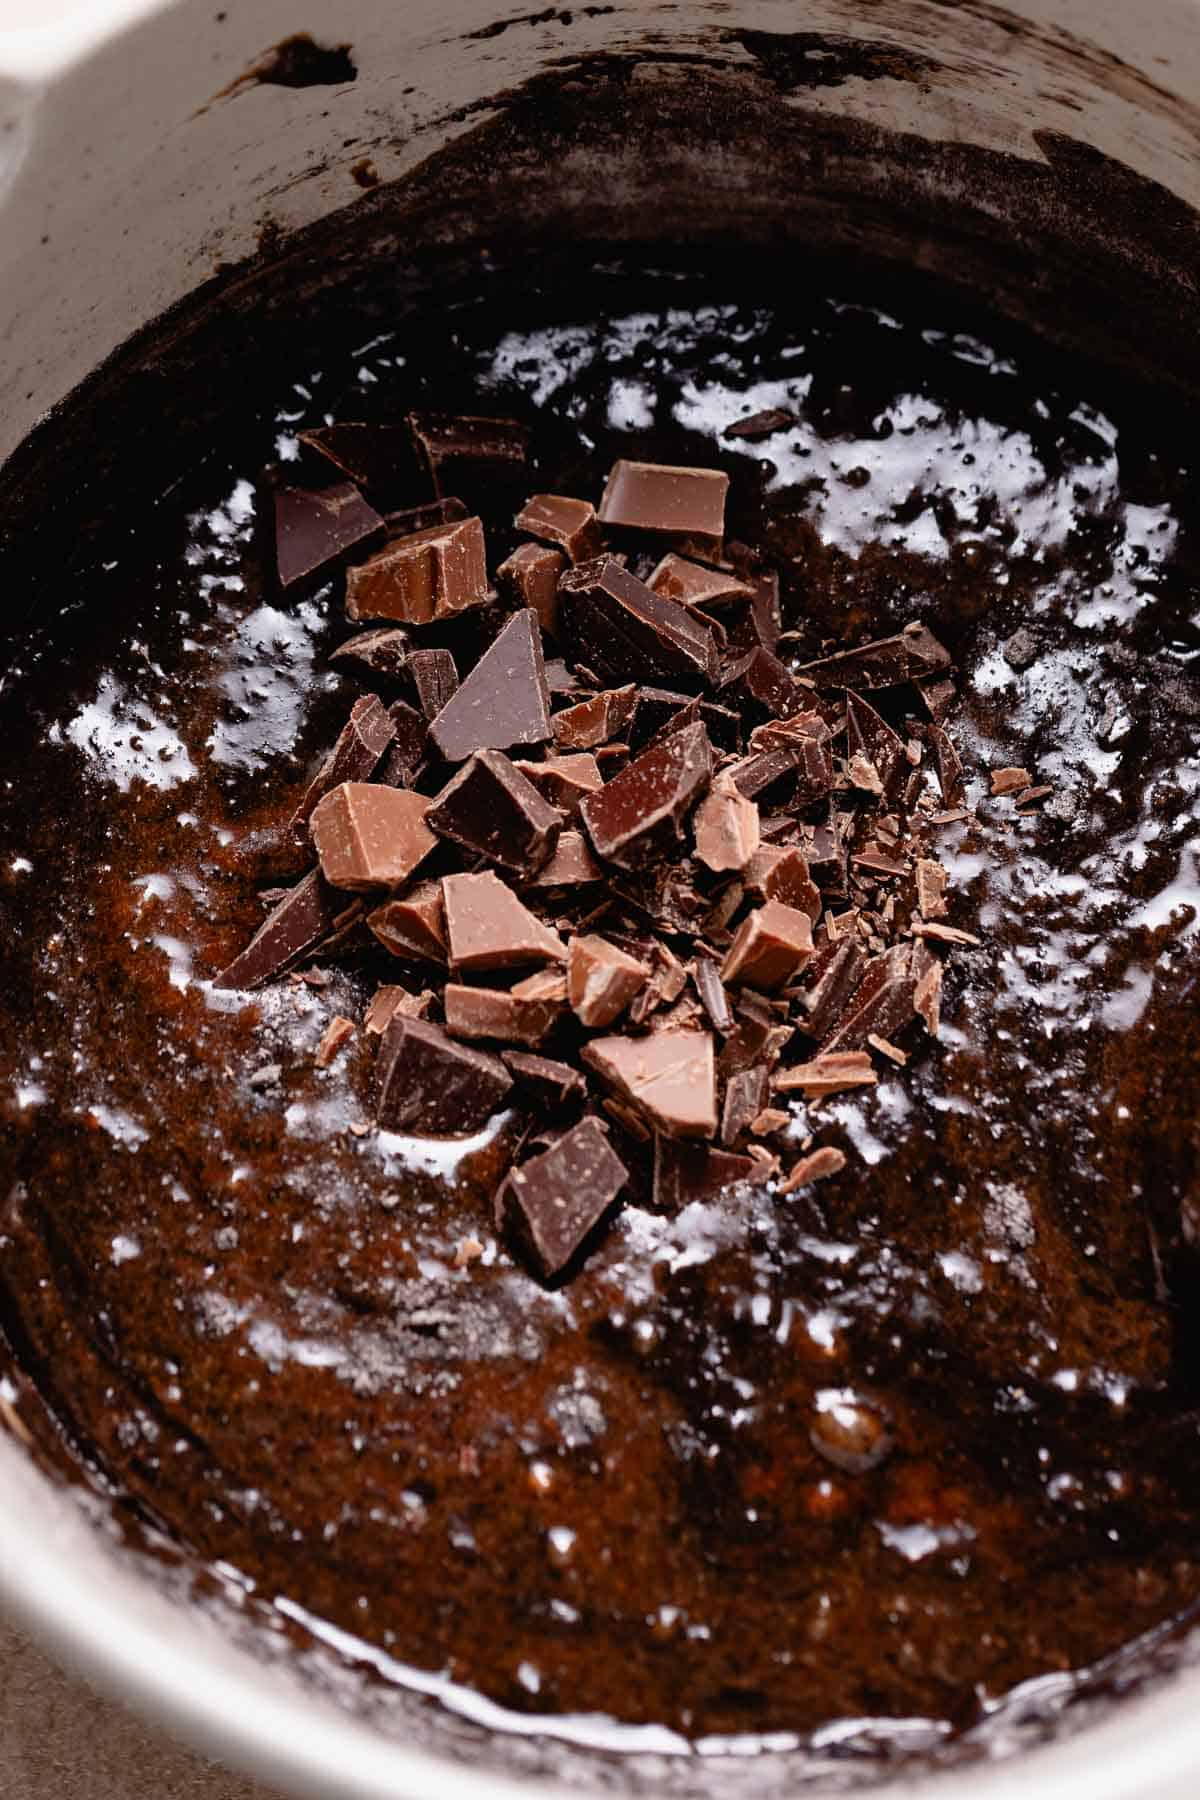 A mixing bowl of brownie batter with chocolate pieces on top before mixing.